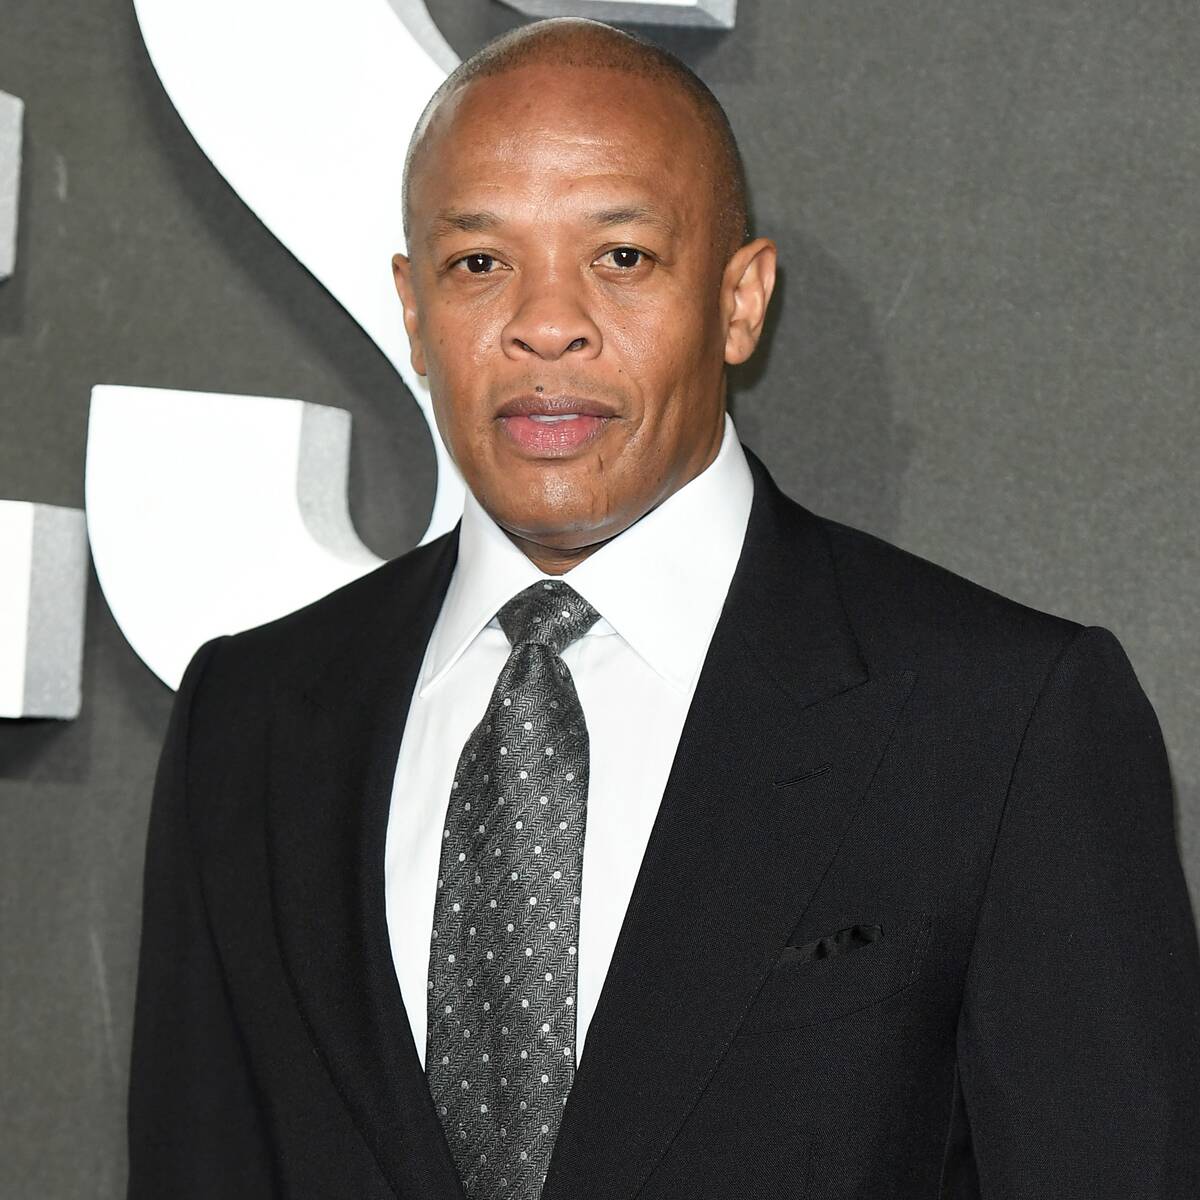 Dr. Dre Is Released From the Hospital 10 Days After Brain Aneurysm